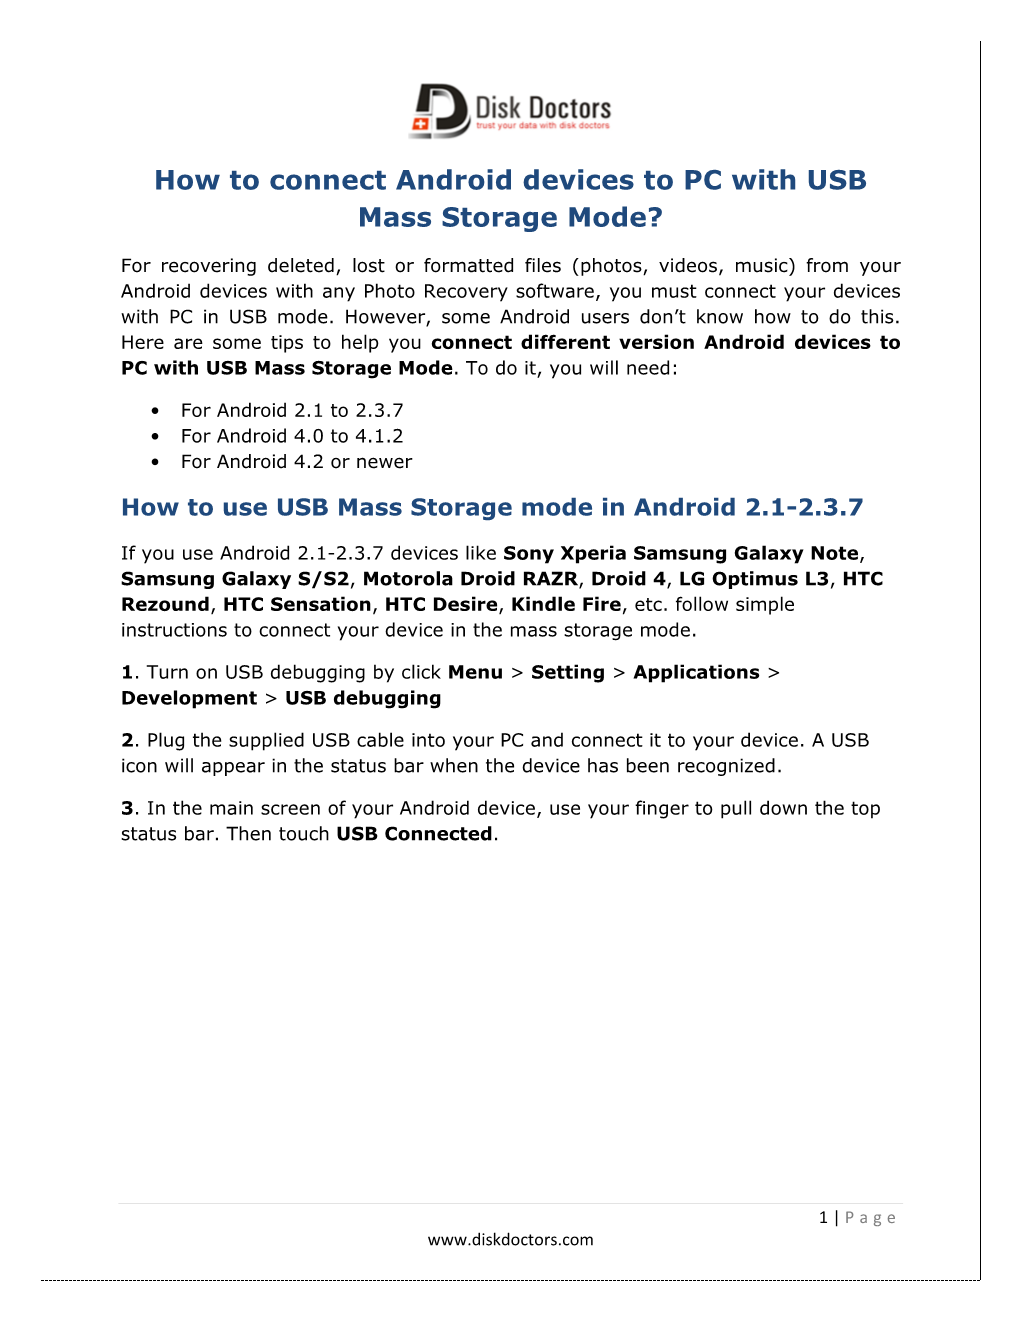 How to Connect Android Devices to PC with USB Mass Storage Mode?